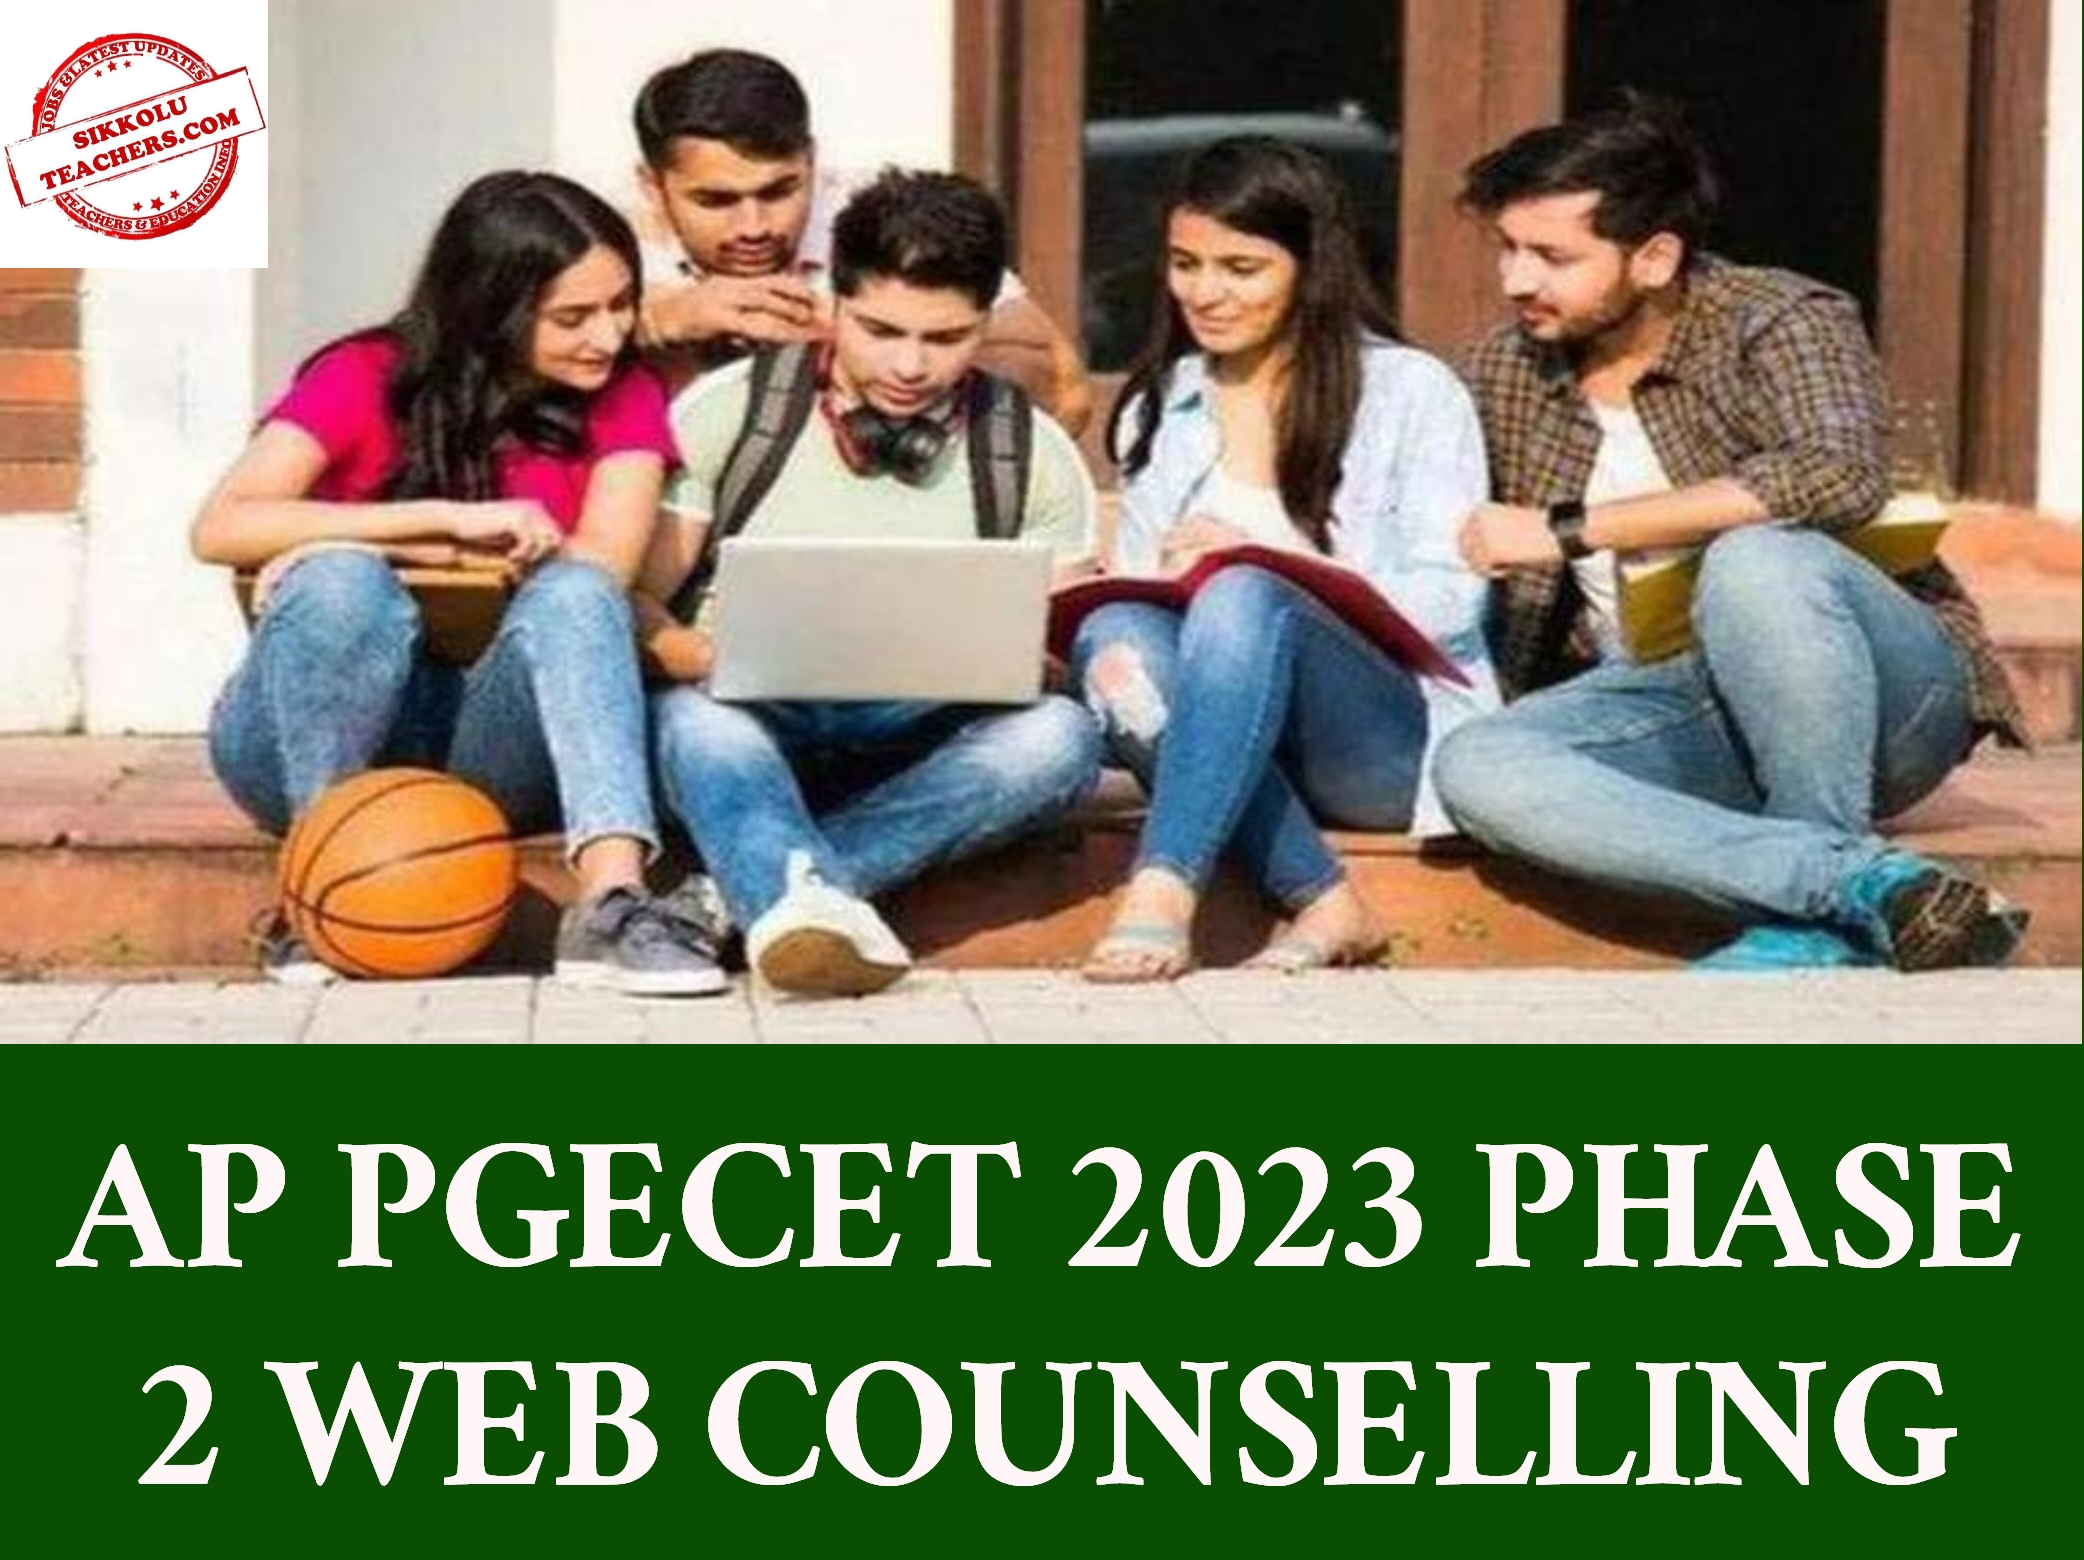 AP PGECET 2023 PHASE 2 WEB COUNSELLING